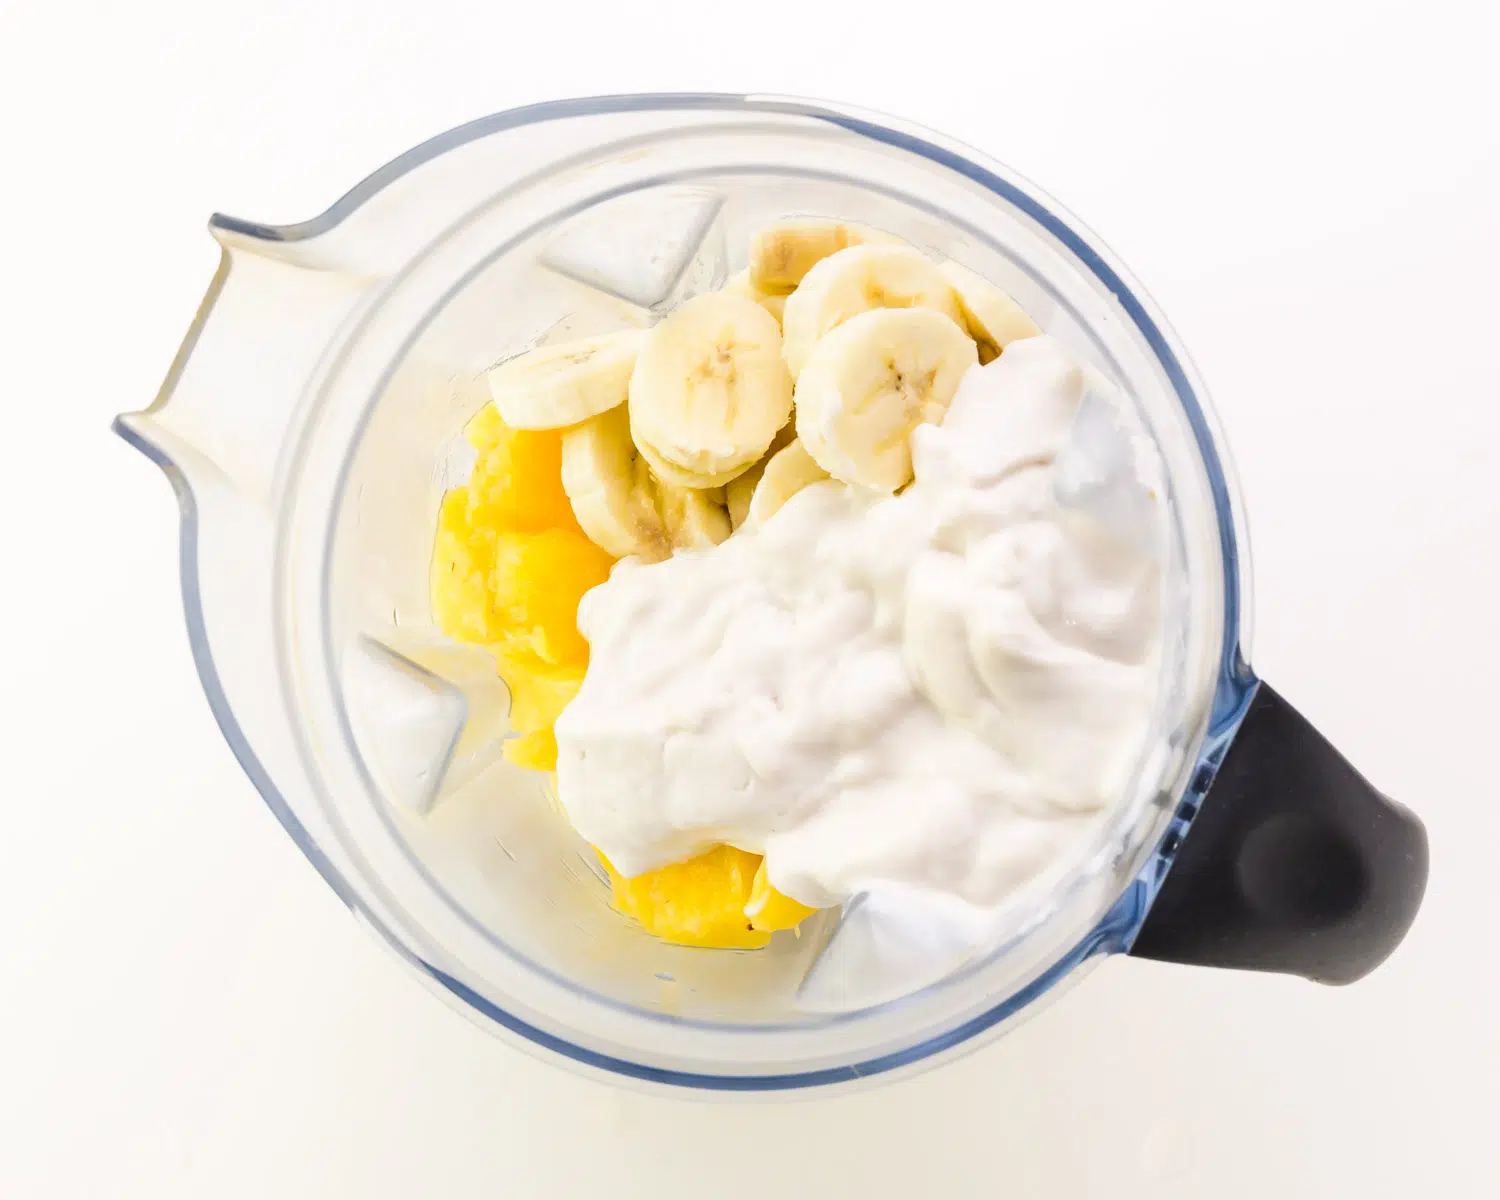 Ingredients are in a blender, including pineapple and bananas.